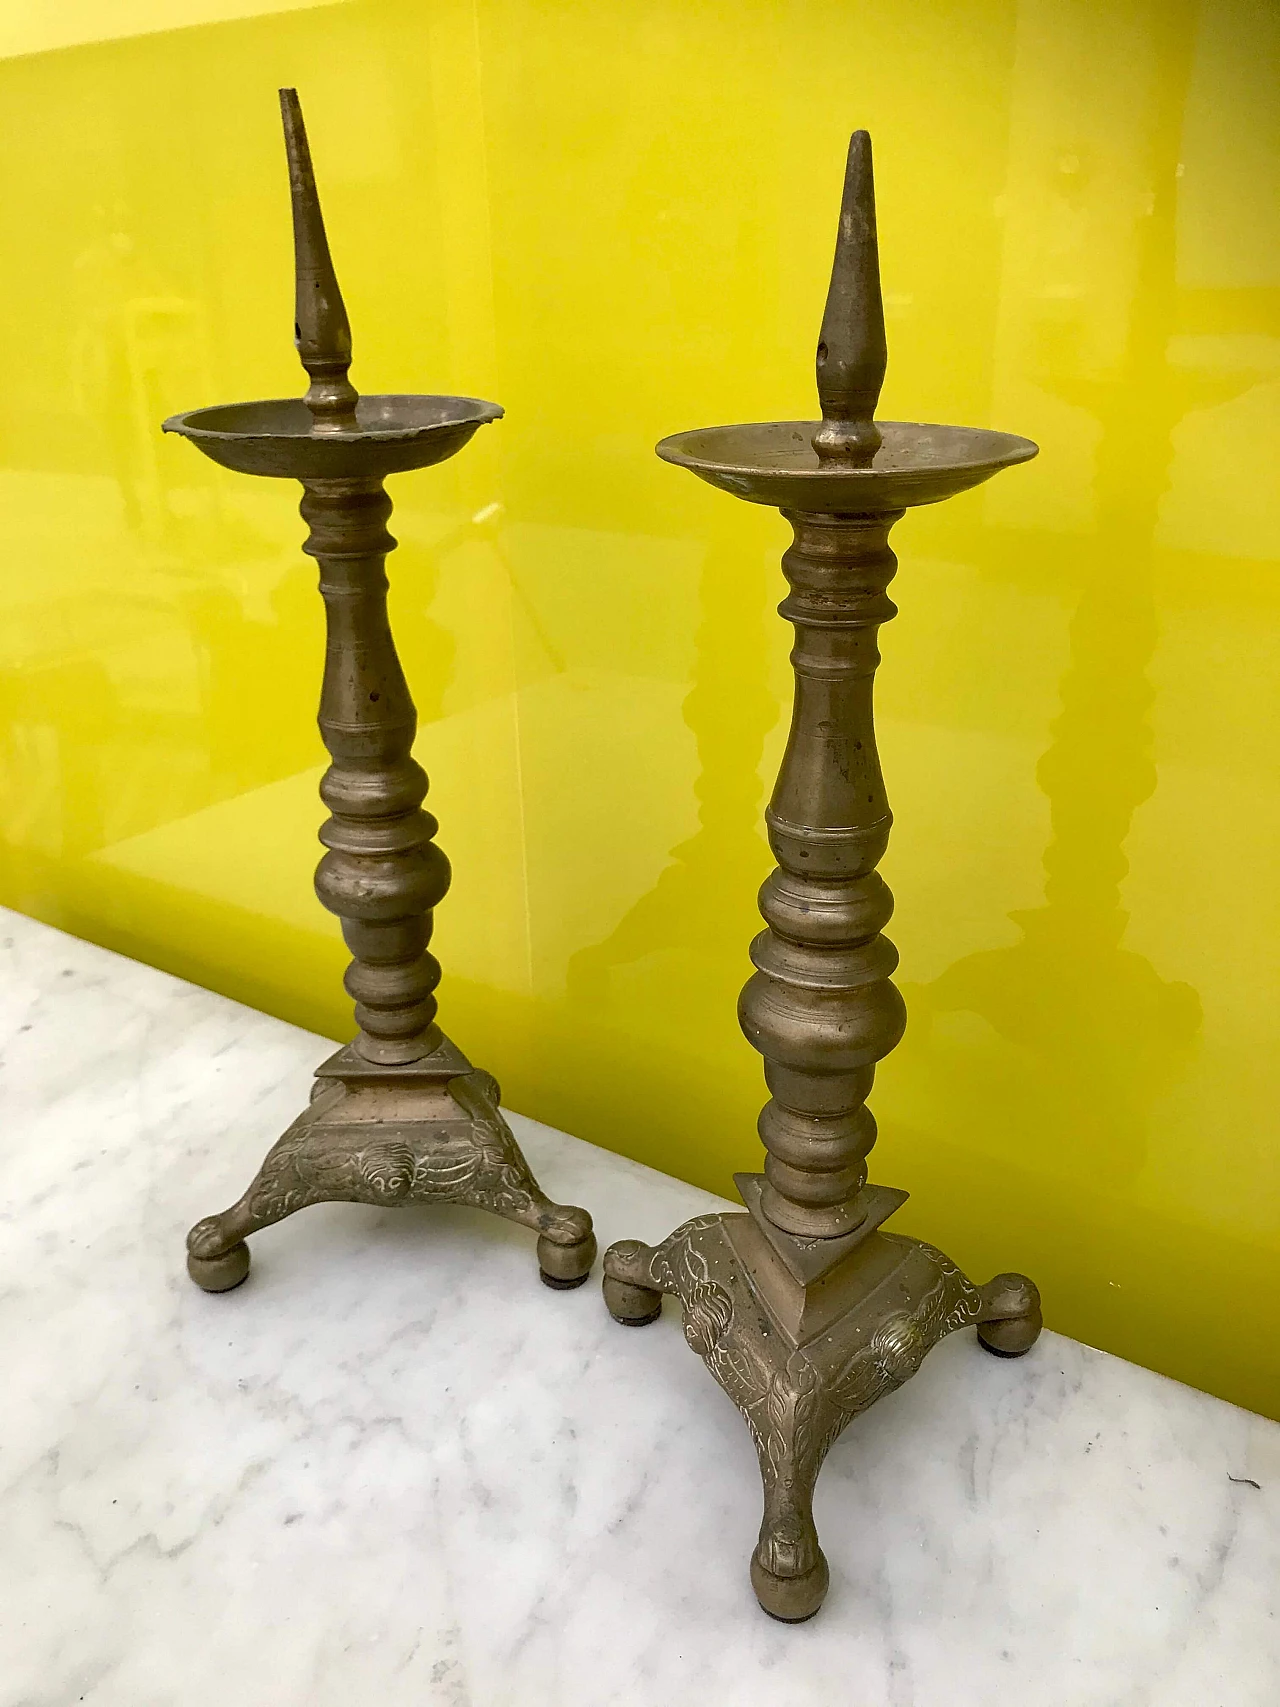 Pair of Italian candlesticks or torch holders in bronze, 17th century 1167795